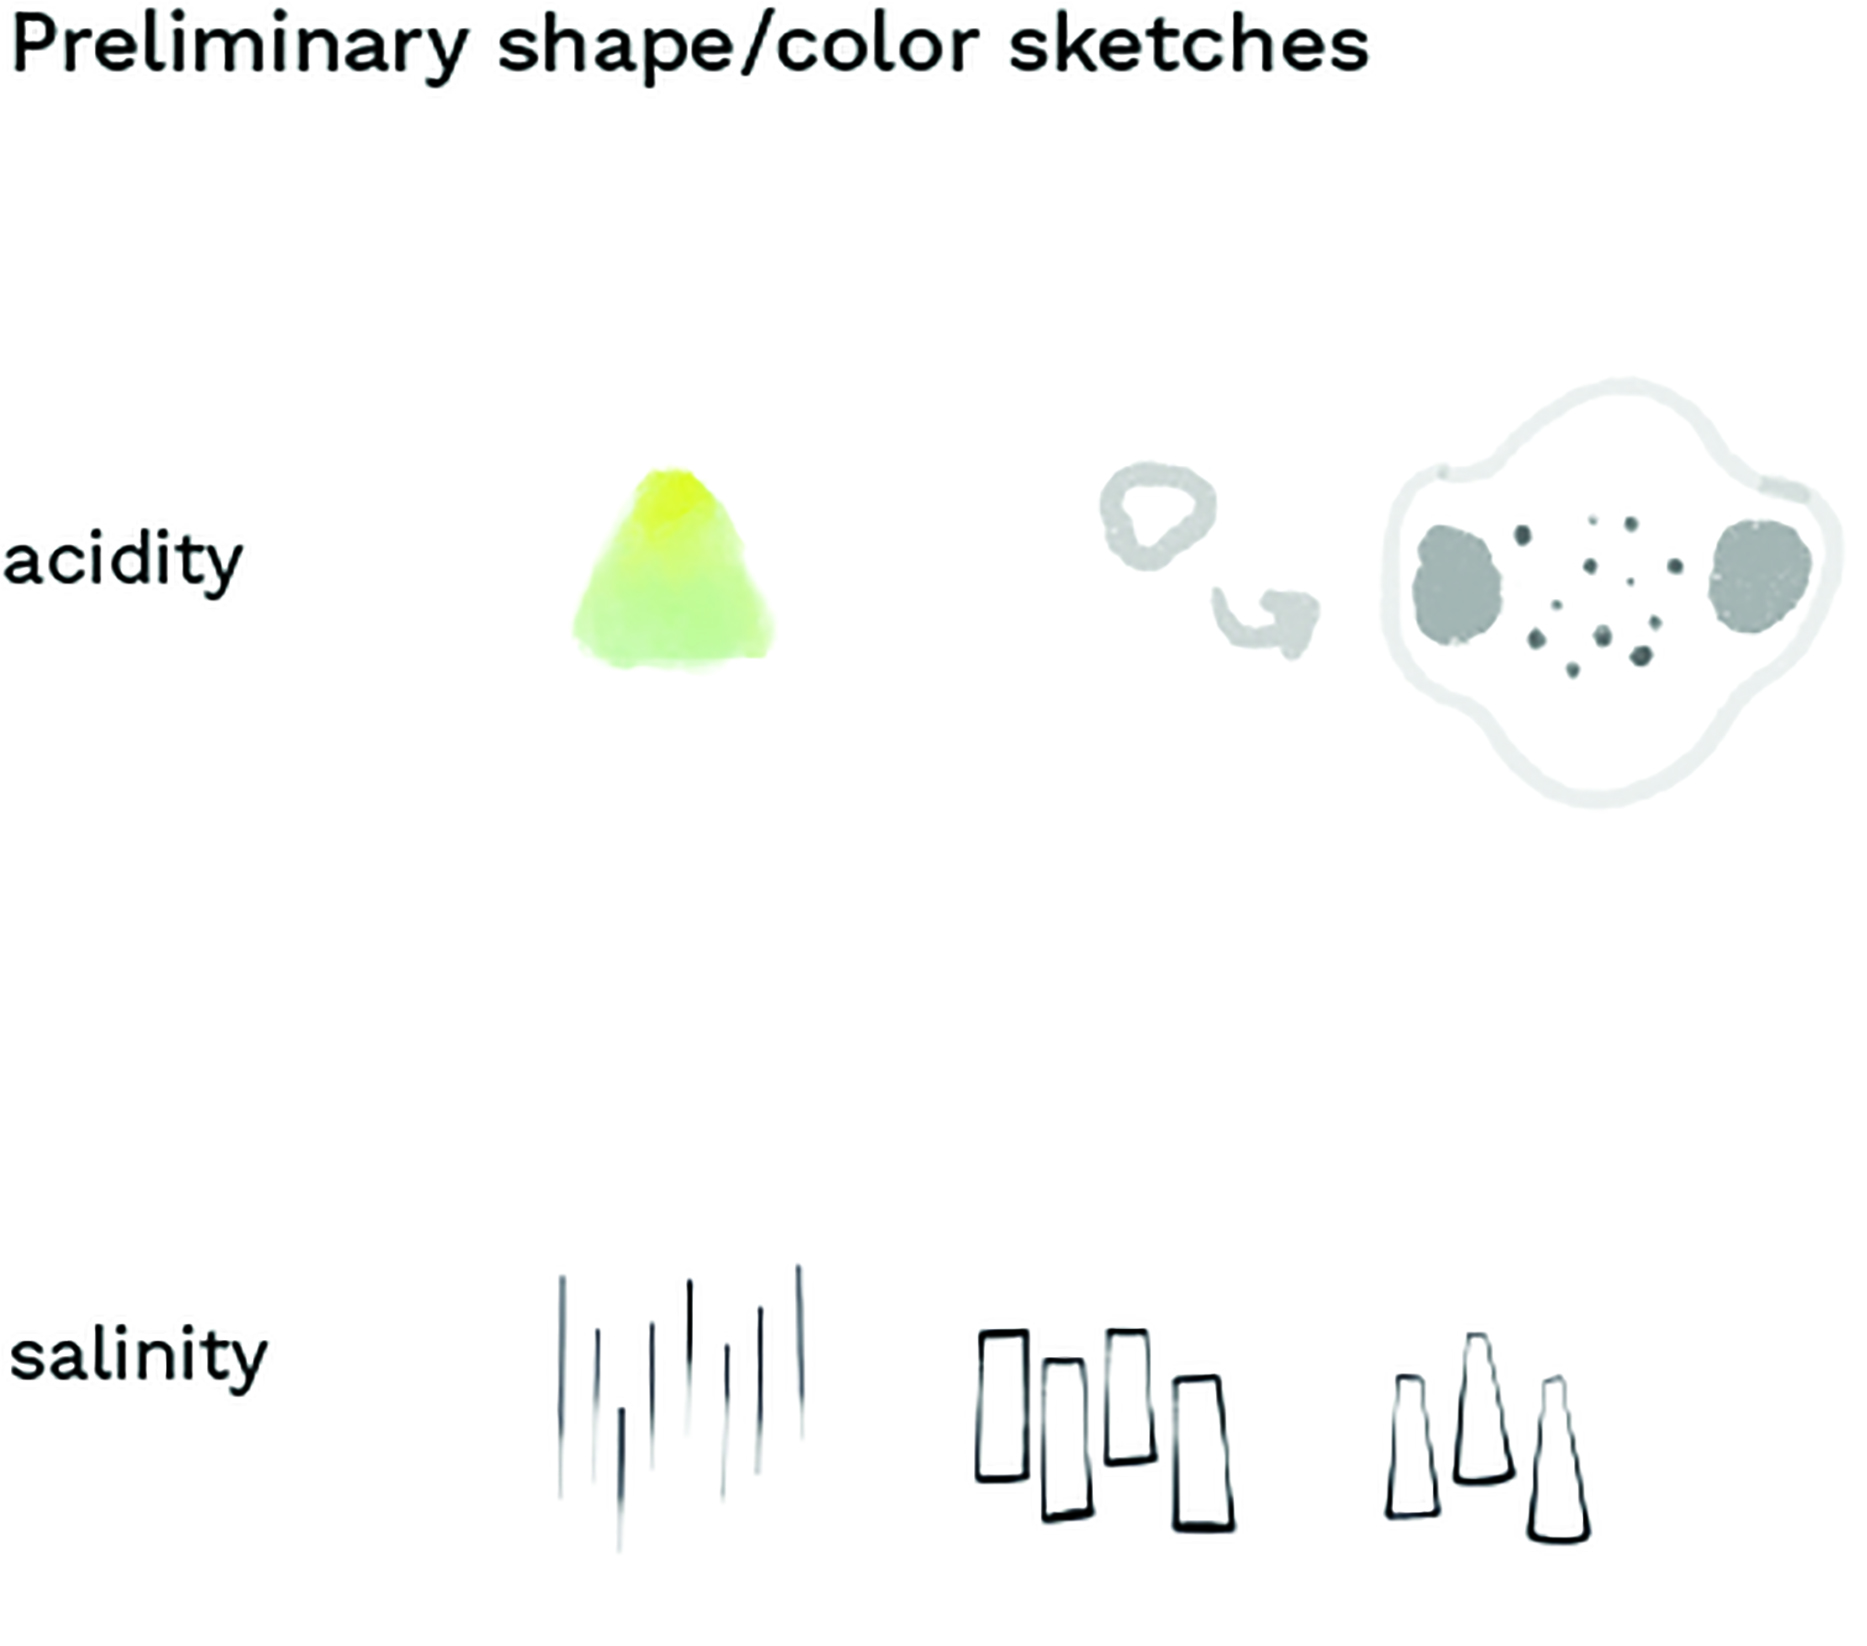 Preliminary shape/color sketches. Acidity is pictured by a green gumdrop shape. This gumdrop is then incorporated into a mass of different blobs of different shapes. Salinity is represented by a group of vertical lines, a group of narrow, vertical rectangles, and a group of narrow, vertical trapezoids.